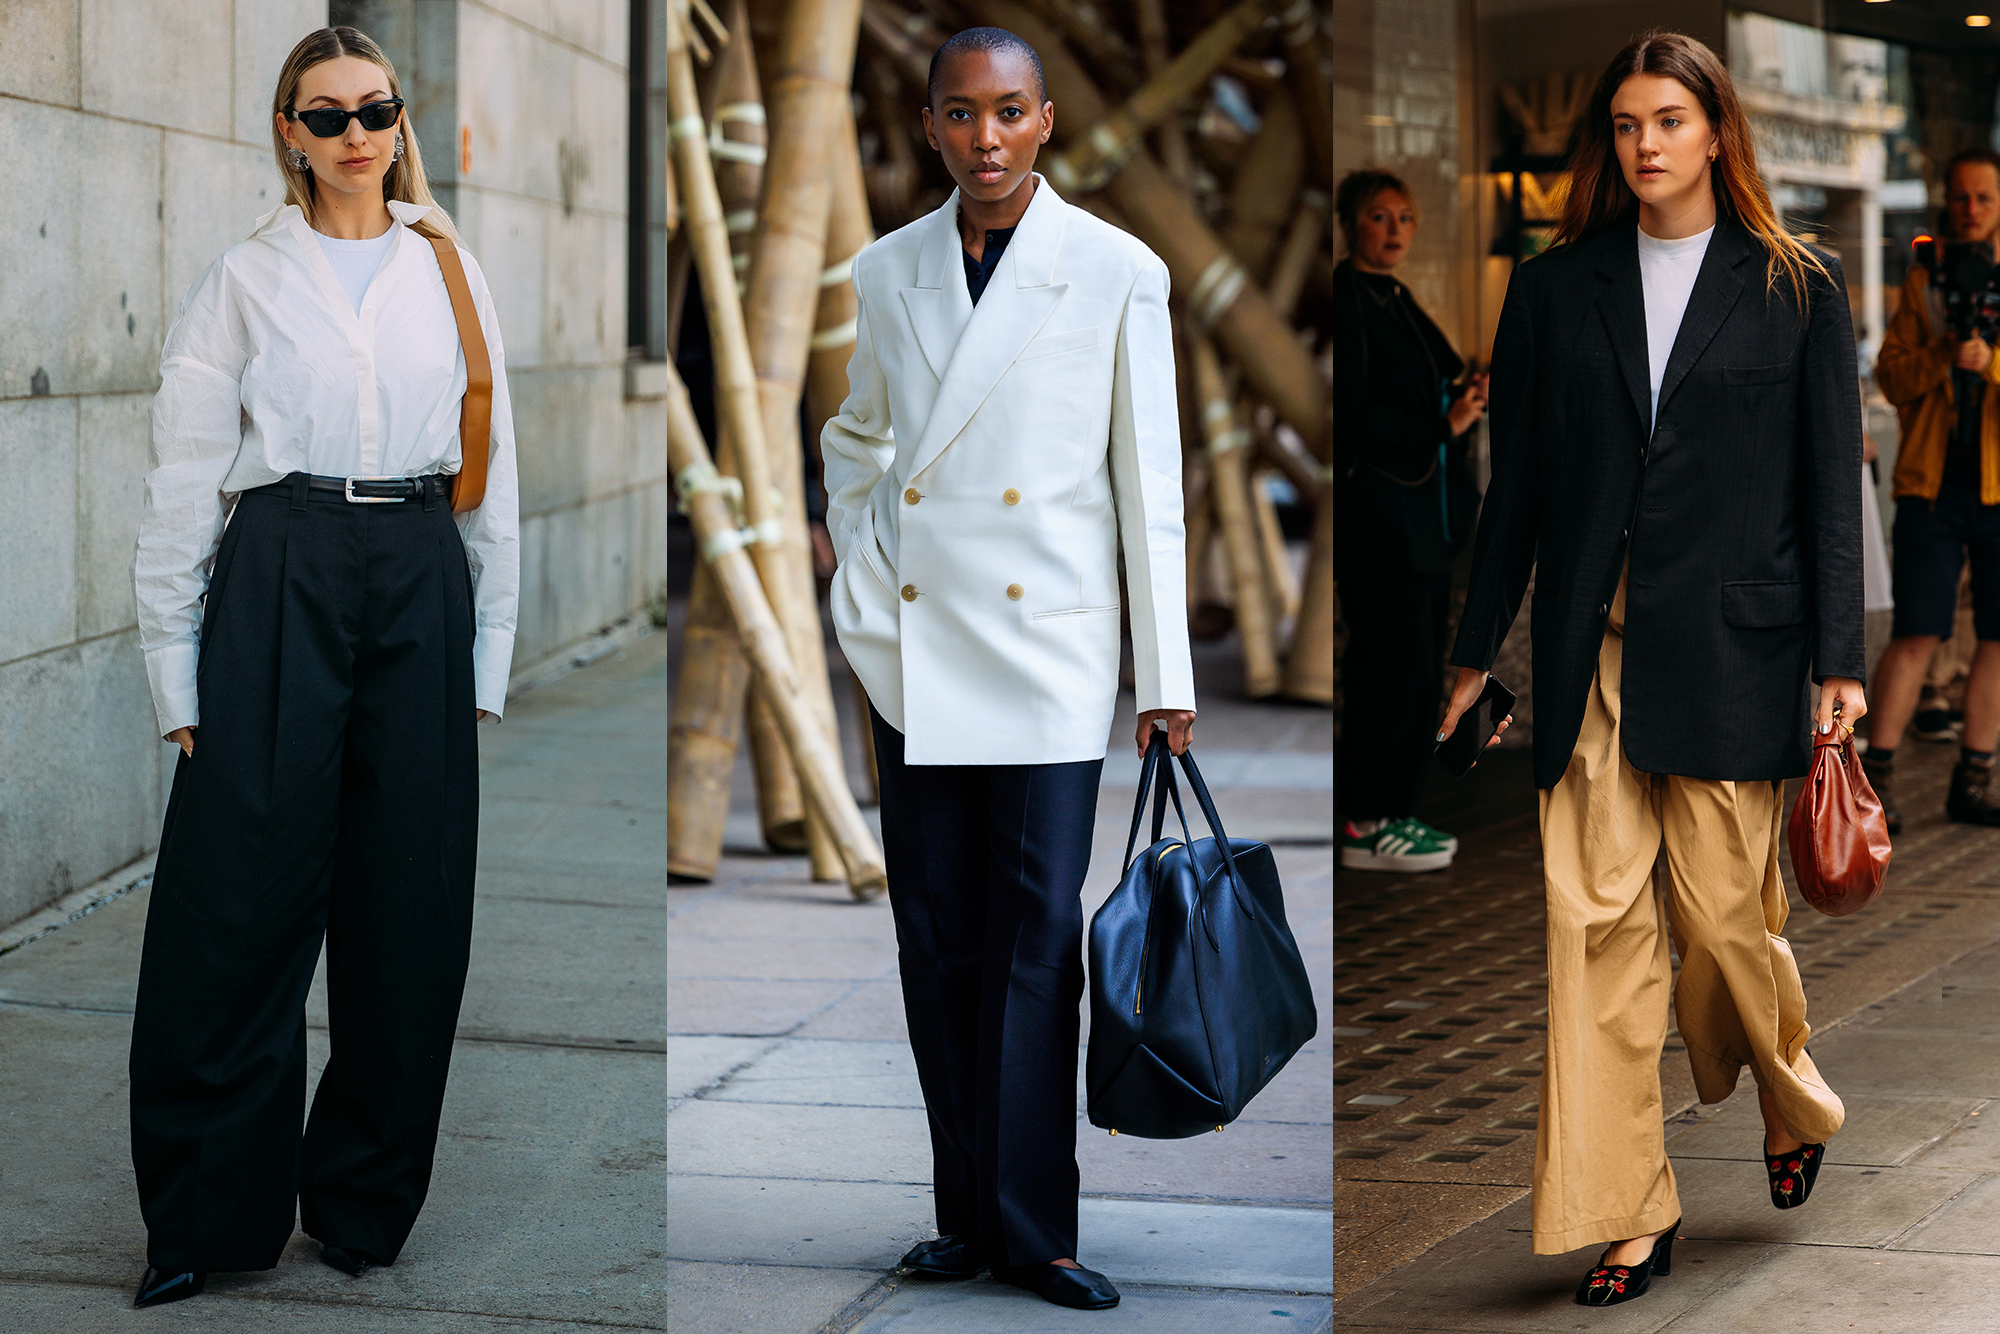 Business Attire for Women: Ultimate Style Guide - The Trend Spotter